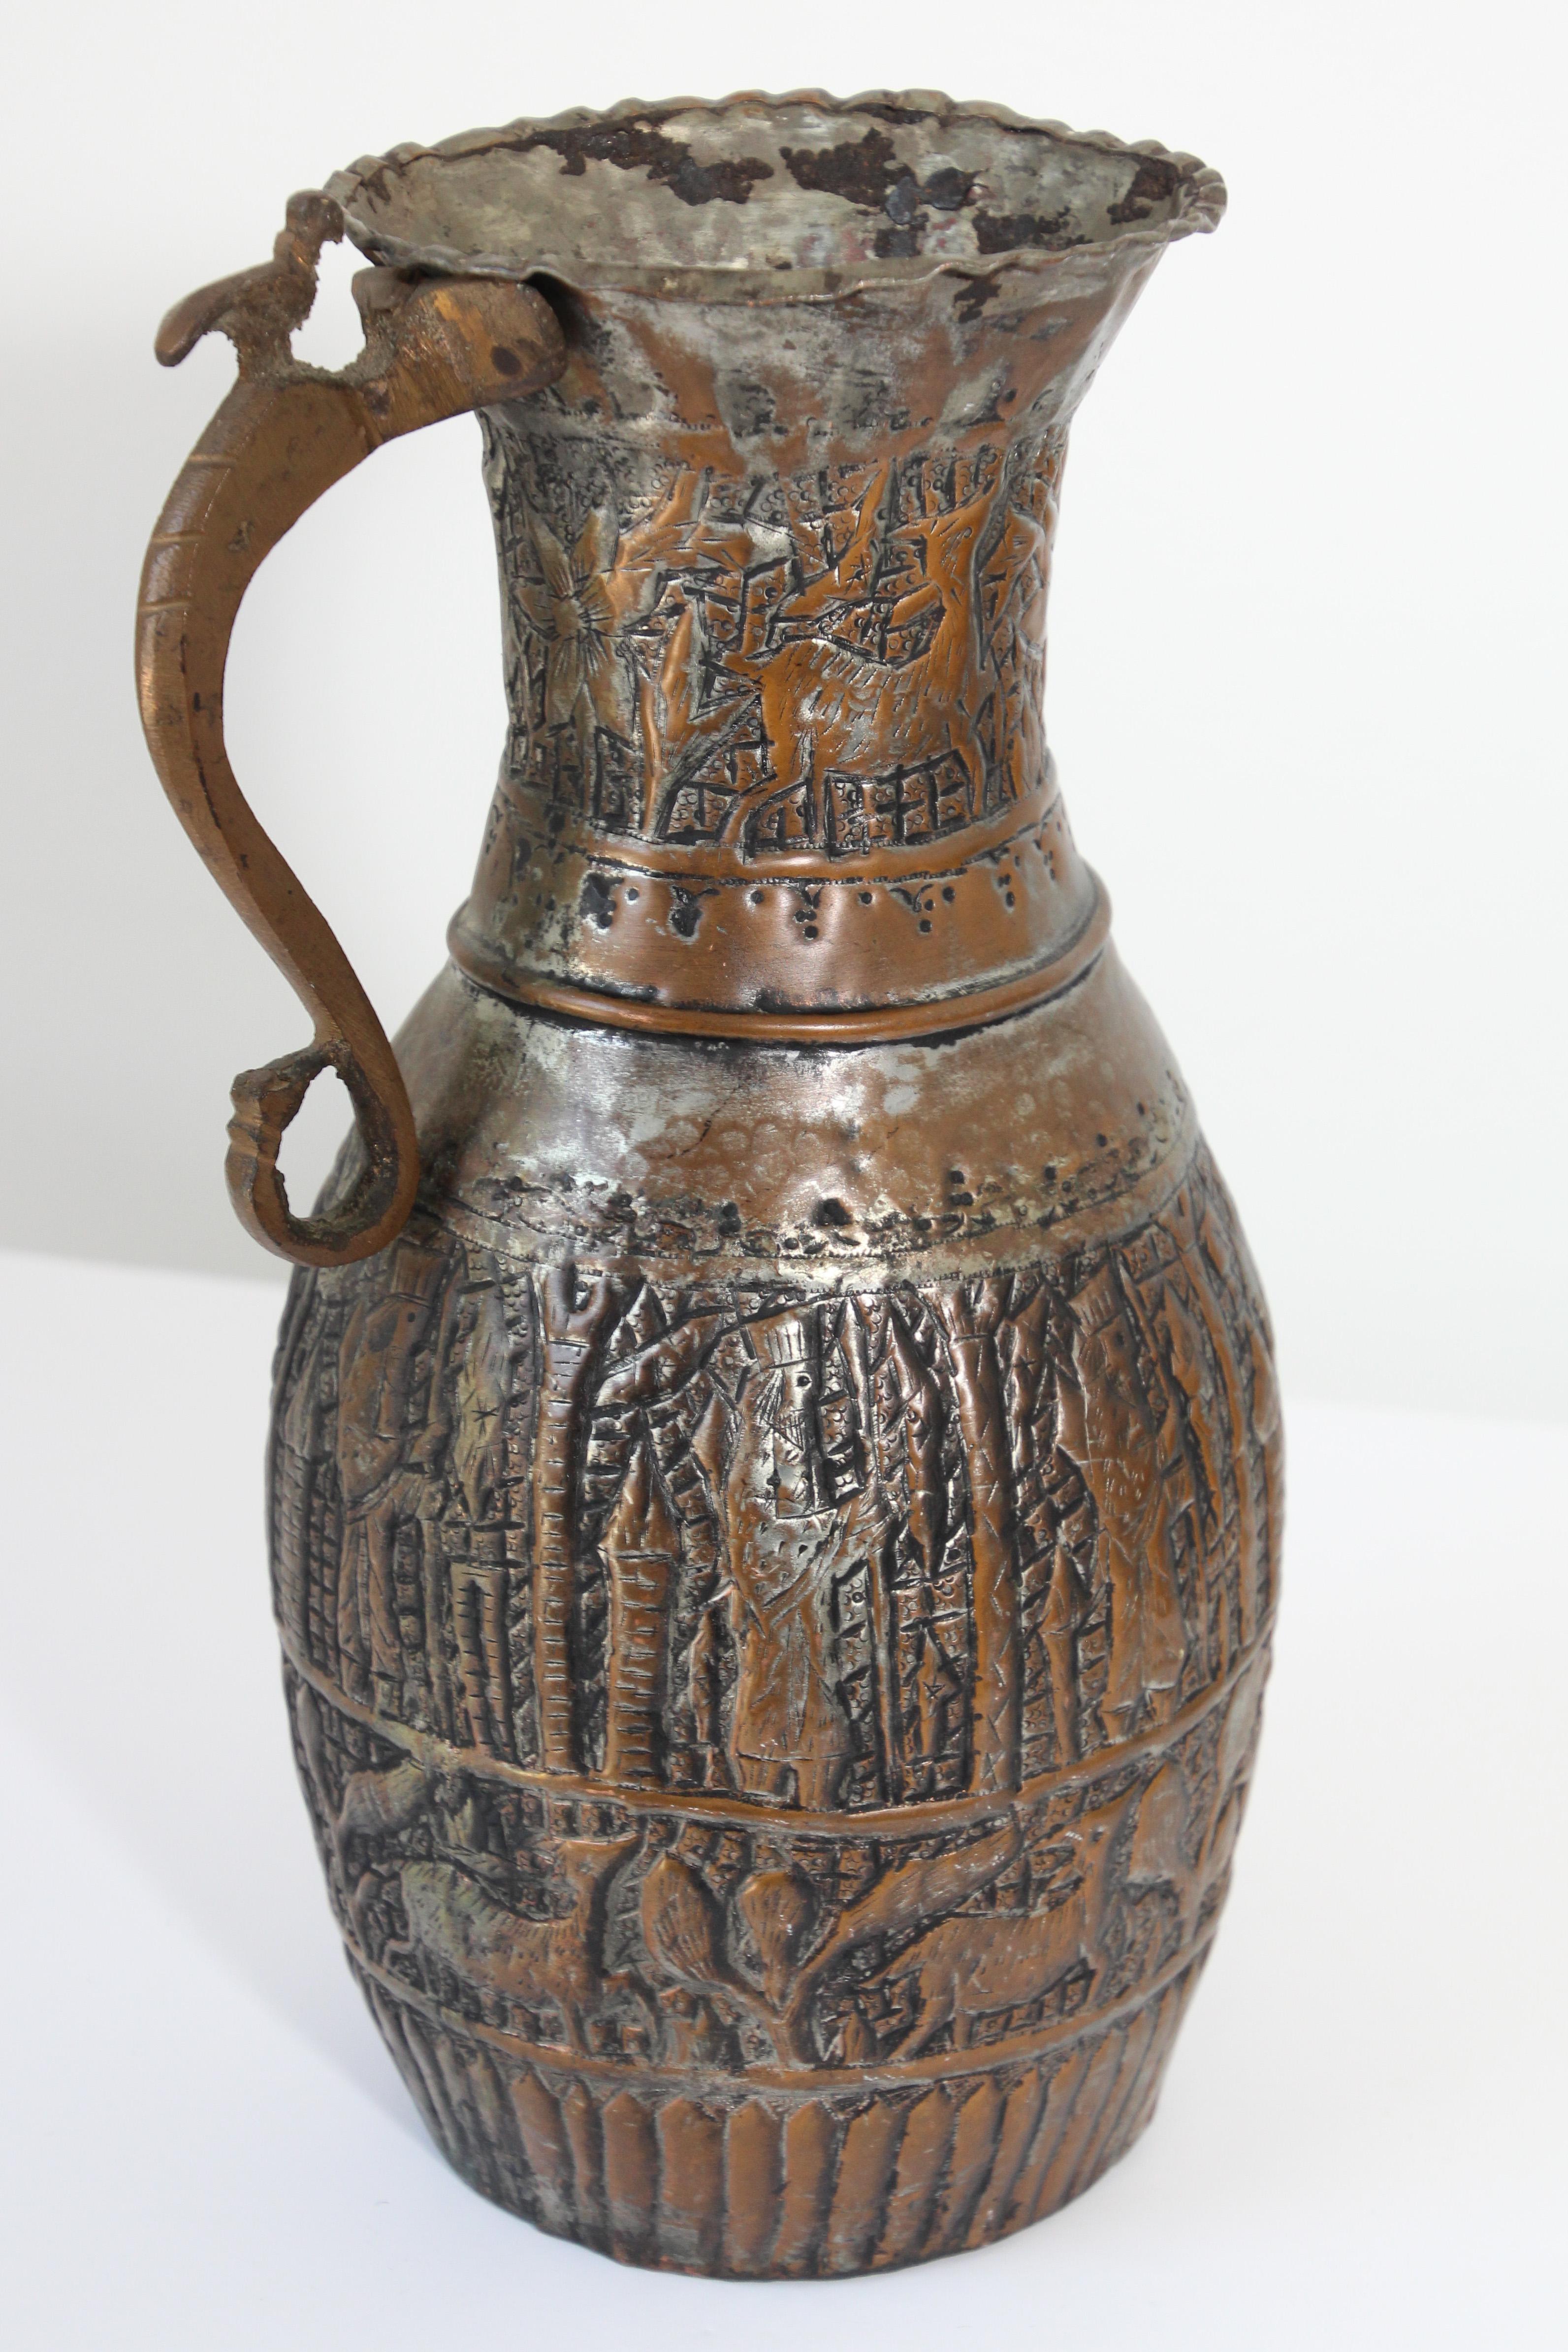 19th century Middle Eastern Arabian tinned copper coffee pot.
A bird on top of the handle.
Hand-hammered and chased copper with figures and animal designs riveted finish on handle.
Missing lid, probably used to make coffee.
Middle Eastern